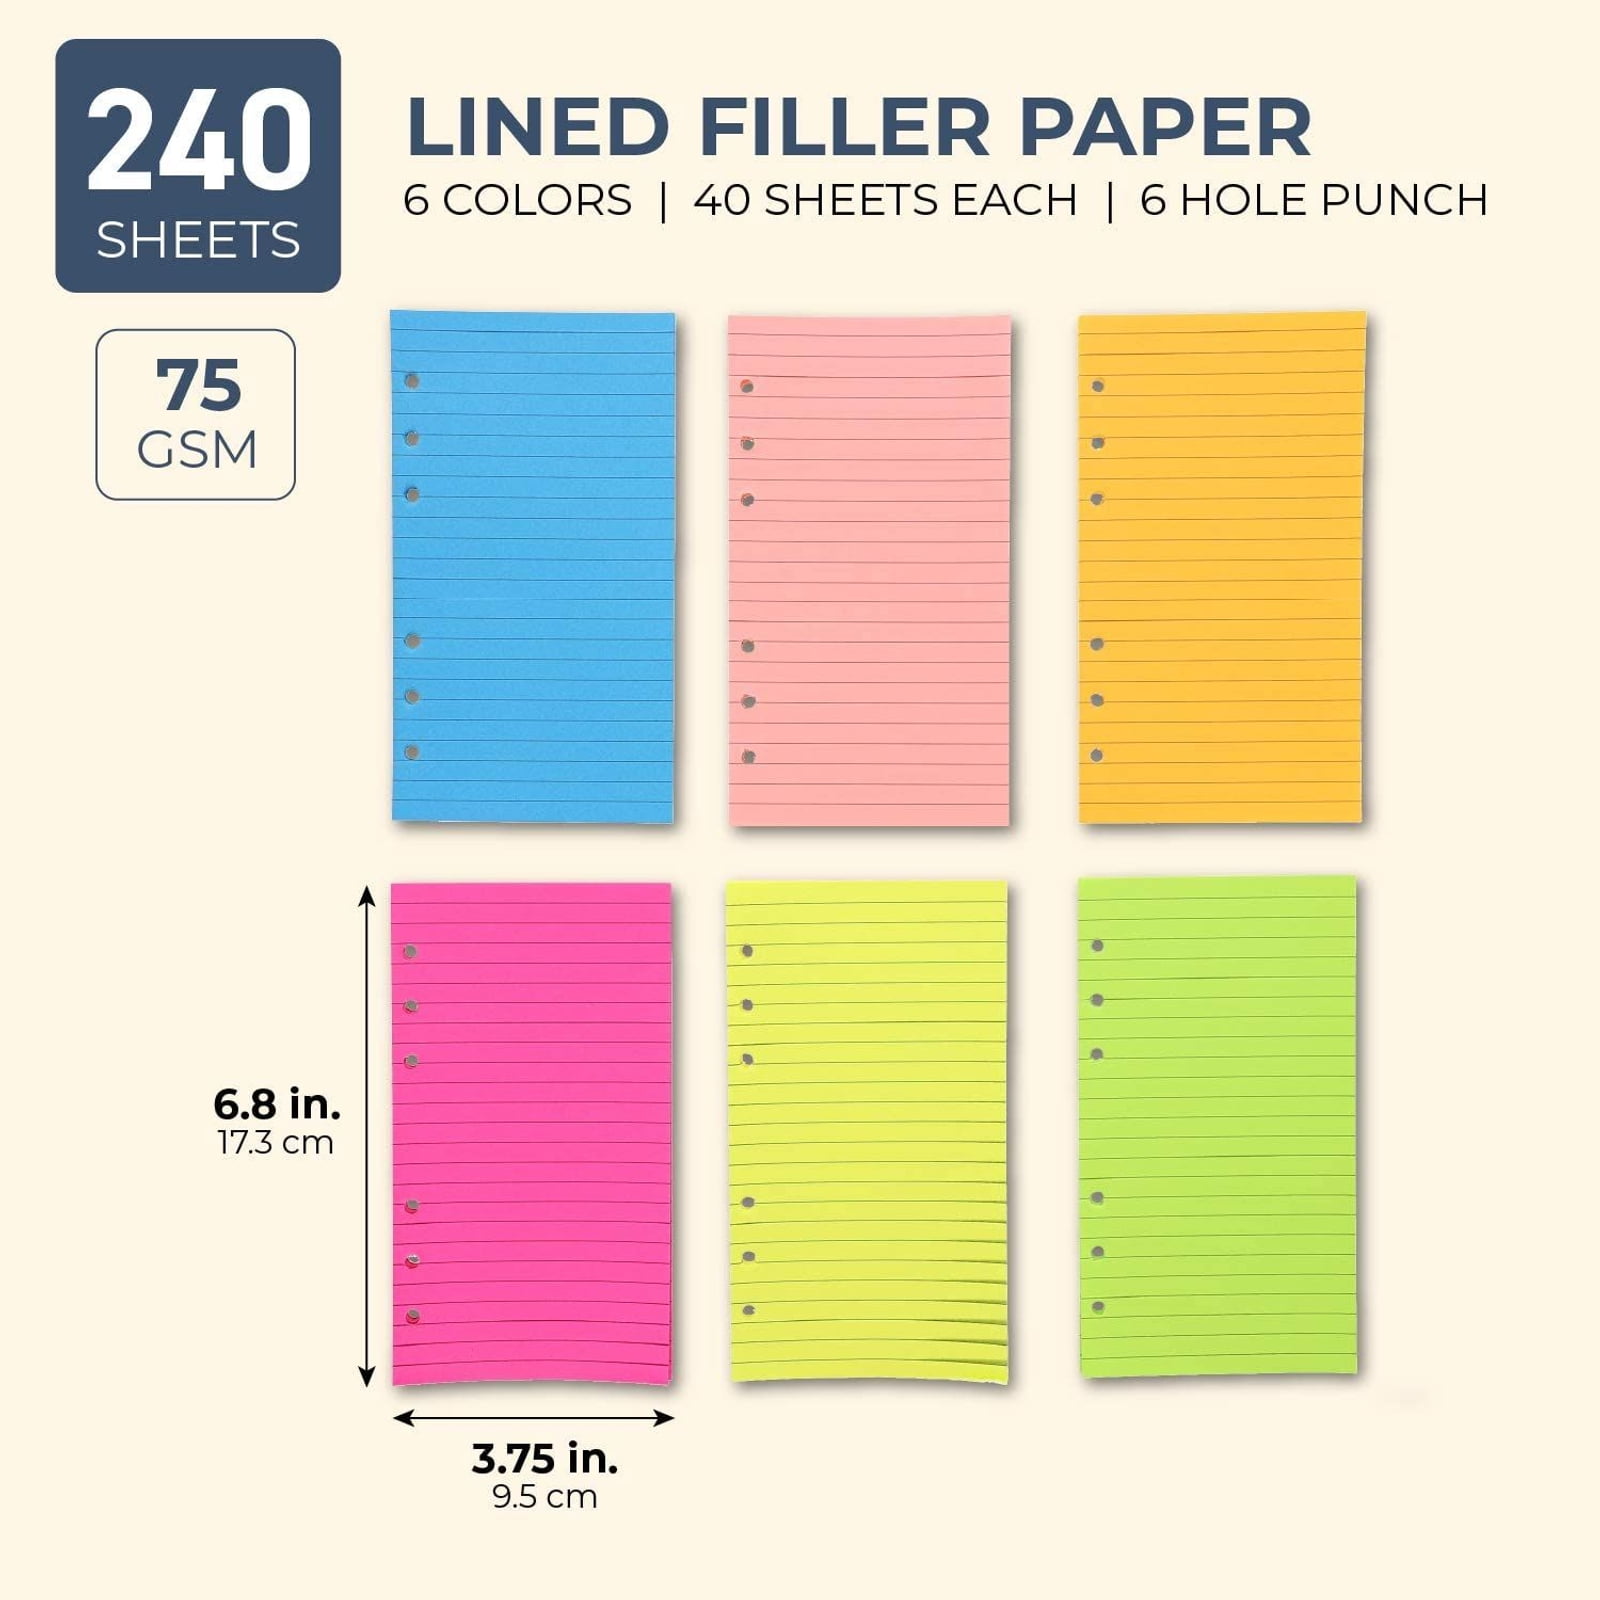 6-Sheet Binder Three-Hole Punch 1/4" Holes, Assorted Colors